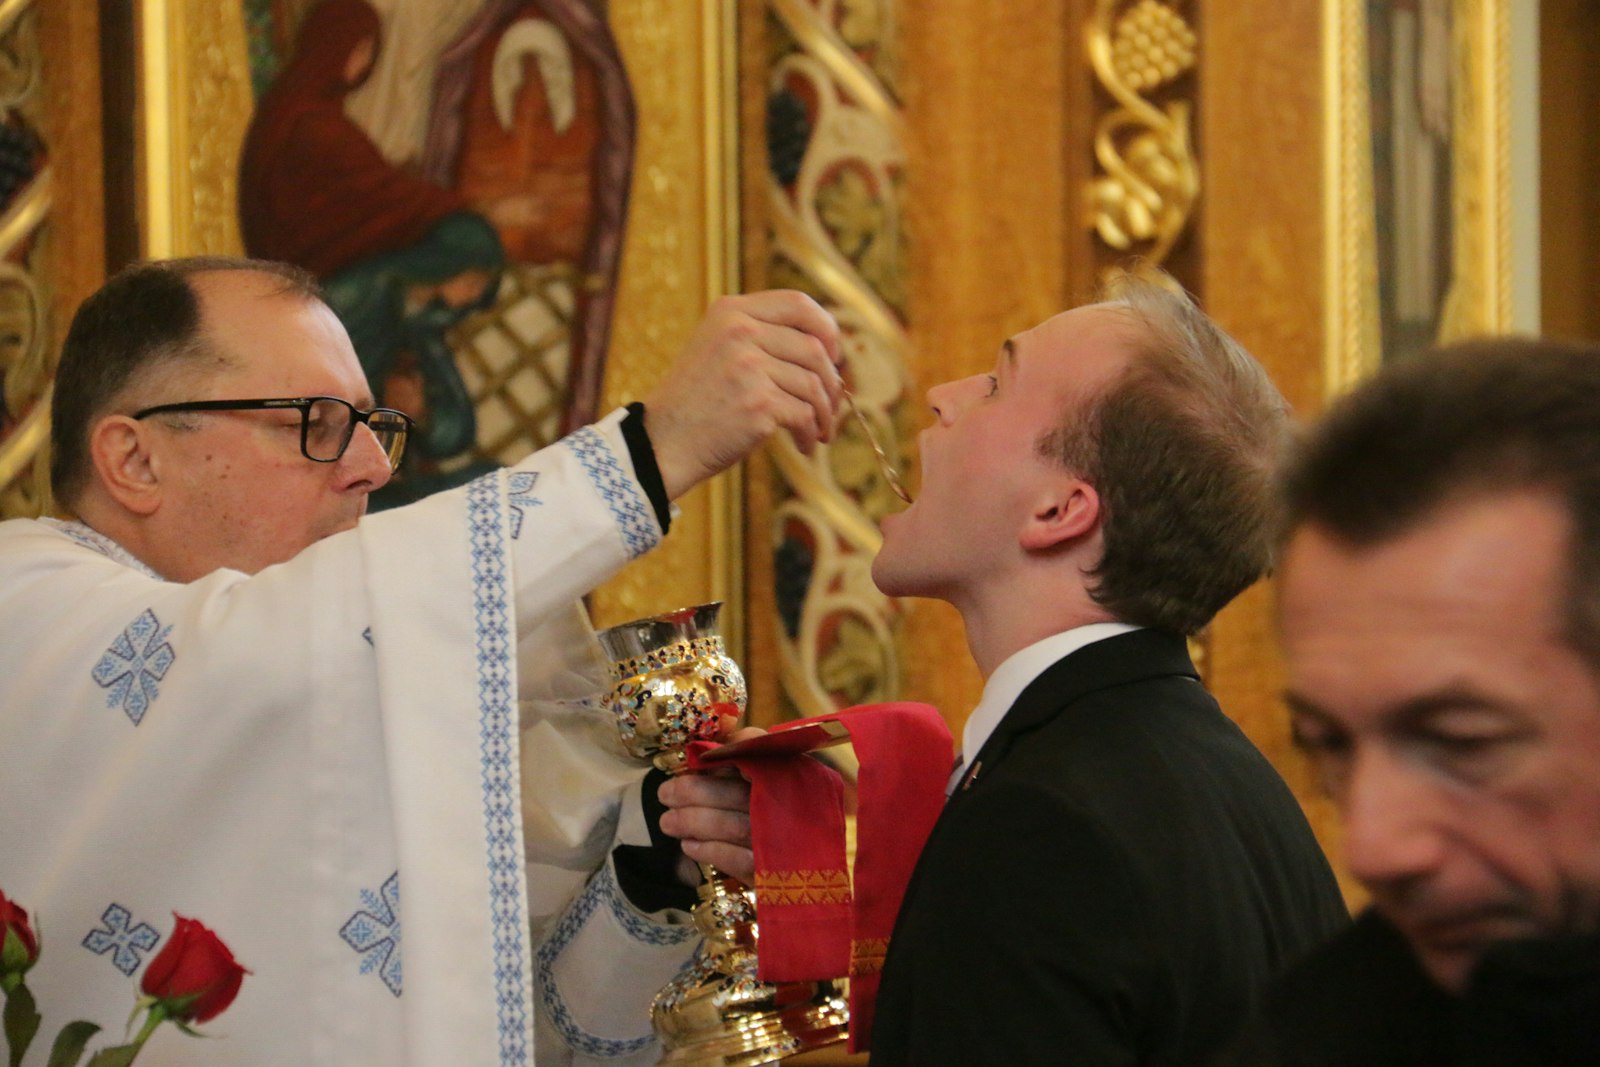 A seminarian receives Holy Communion under both species -- the Sacred Host and the Precious Blood -- as is custom in the Ukrainian Greek Catholic Rite. Fr. Daniel Schaicoski thanked the seminarians for being at Immaculate Conception, praying for peace in Ukraine.